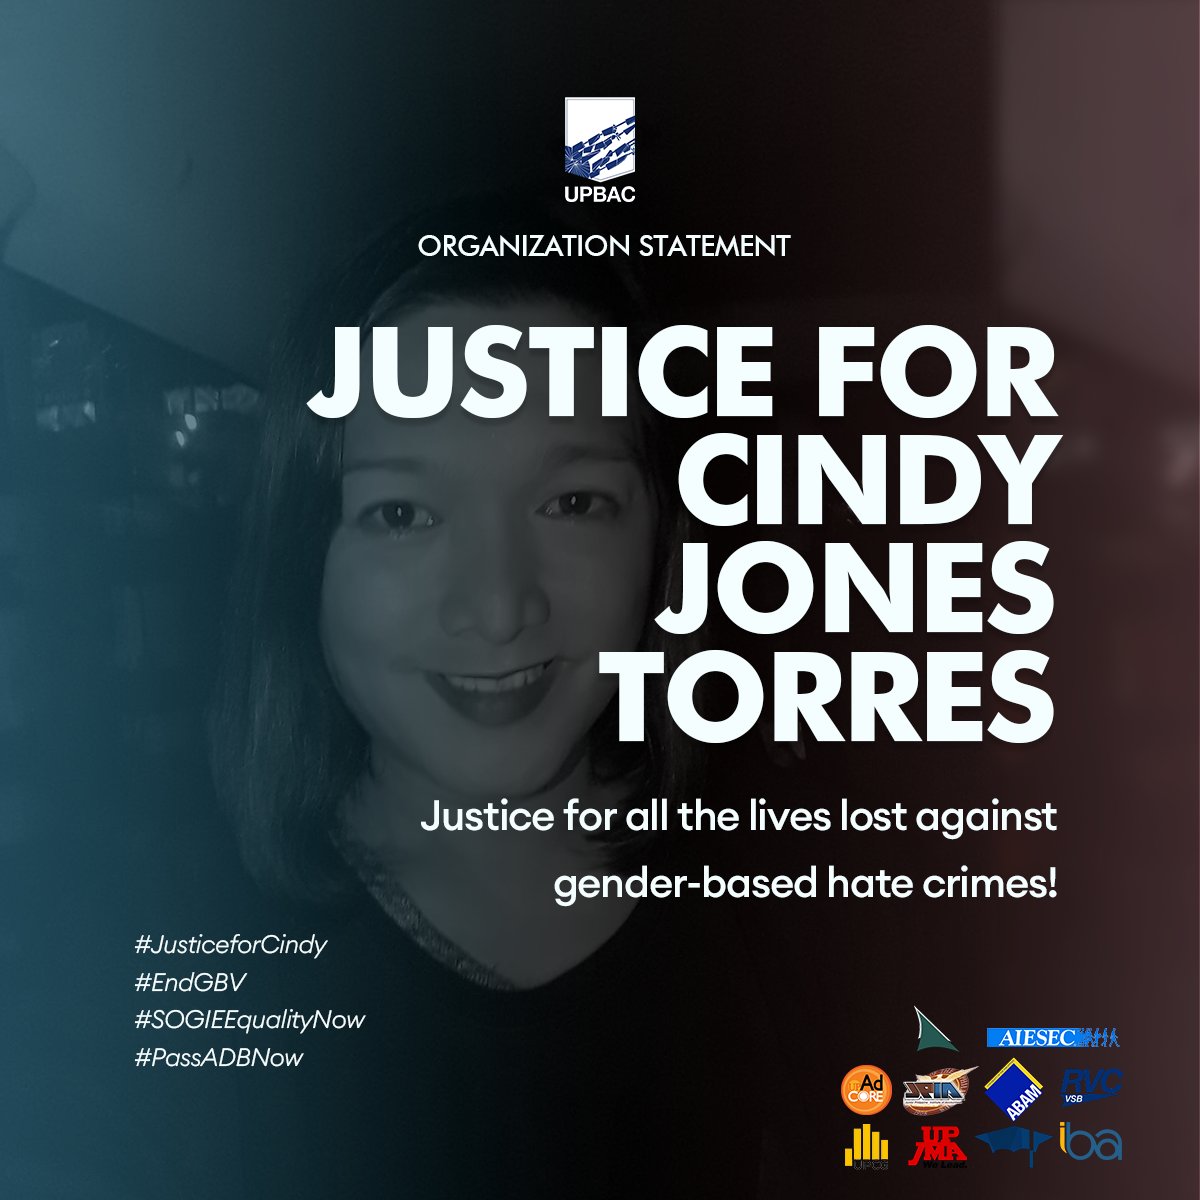 UP BAC vehemently condemns all forms of violence towards the LGBTQIA+ community driven by prejudice and homophobia.

#JusticeforCindy
#EndGBV
#SOGIEEqualityNow
#PassADBNow